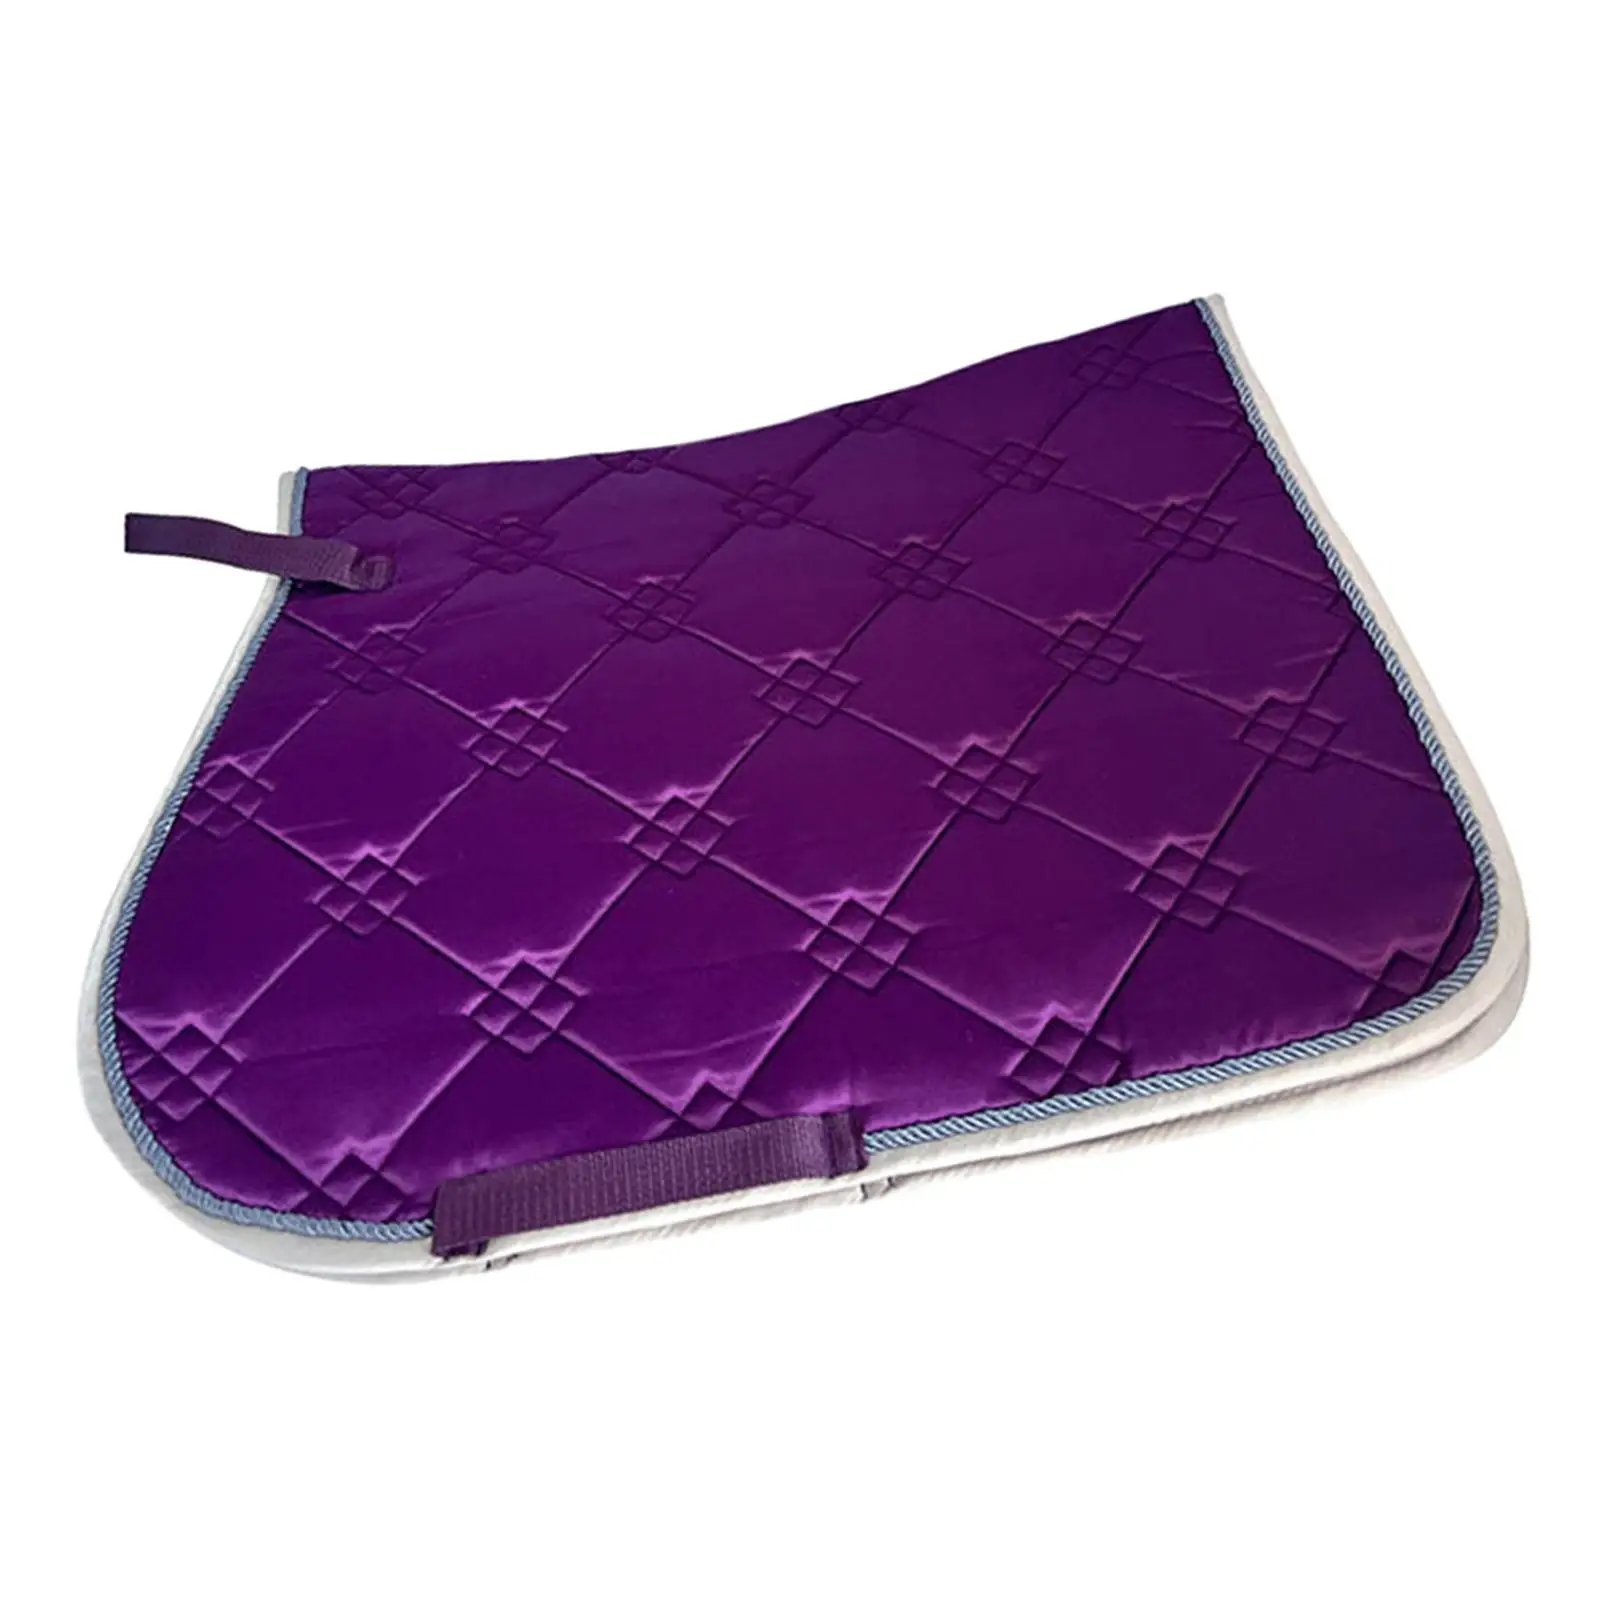 Saddle Pad for Horse Durable Thickening Sports Sponge Lining Dressage Pad